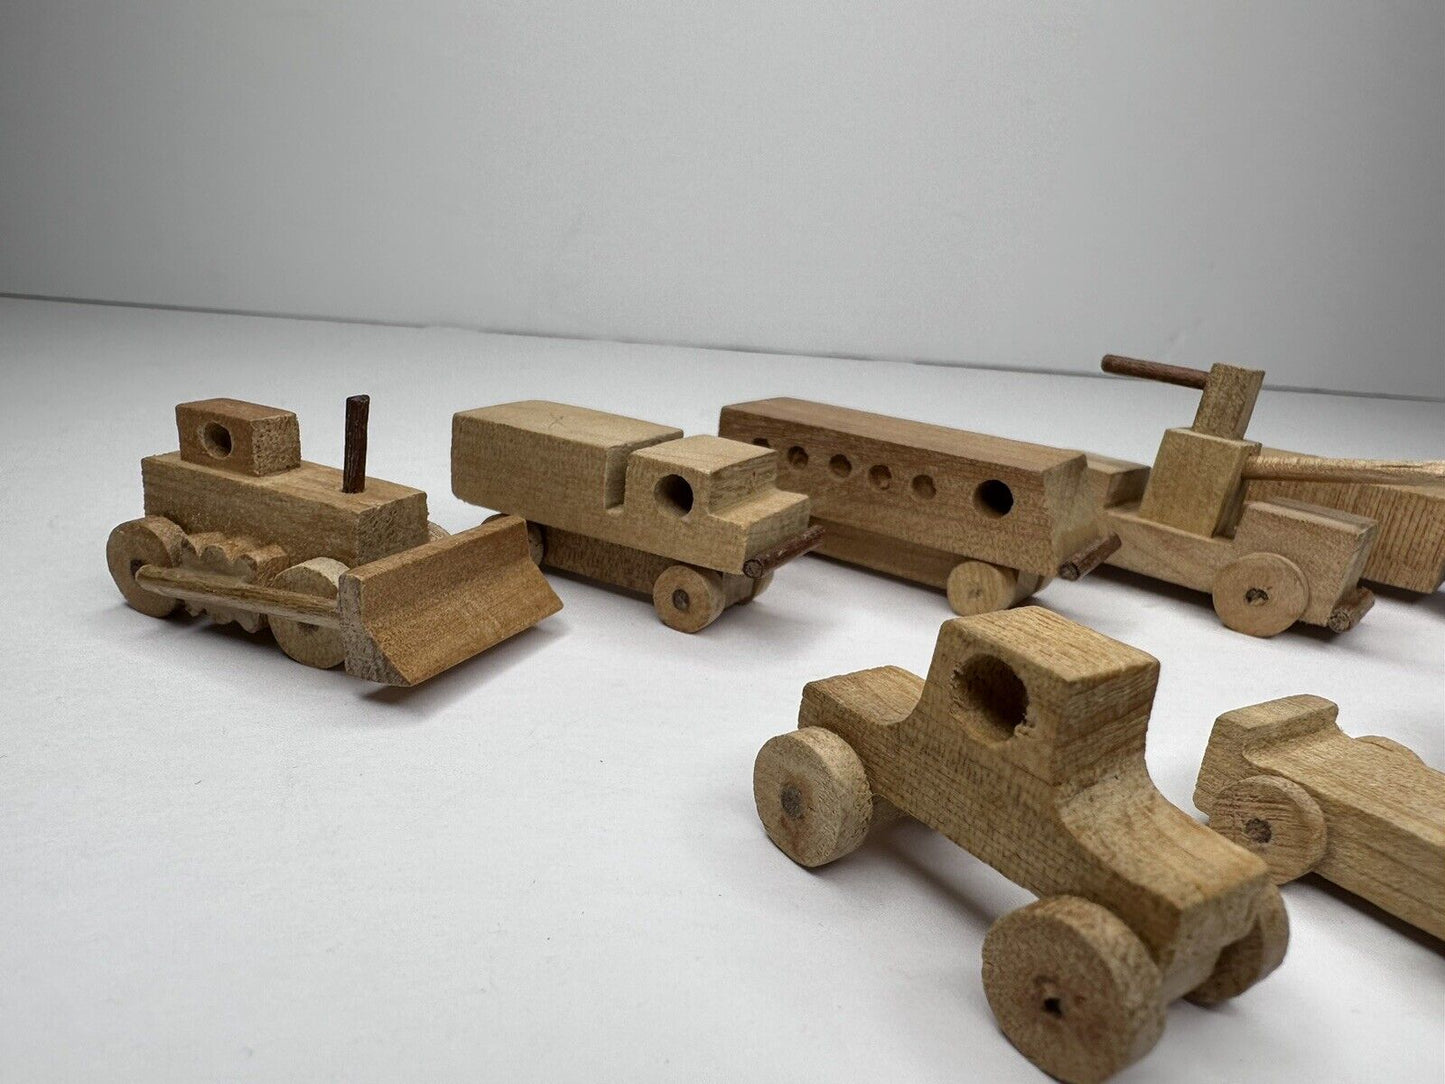 Hand-Crafted Amish Solid Hardwood Toy Cars Set of 9 - Made in USA, Natural Finish - TreasuTiques